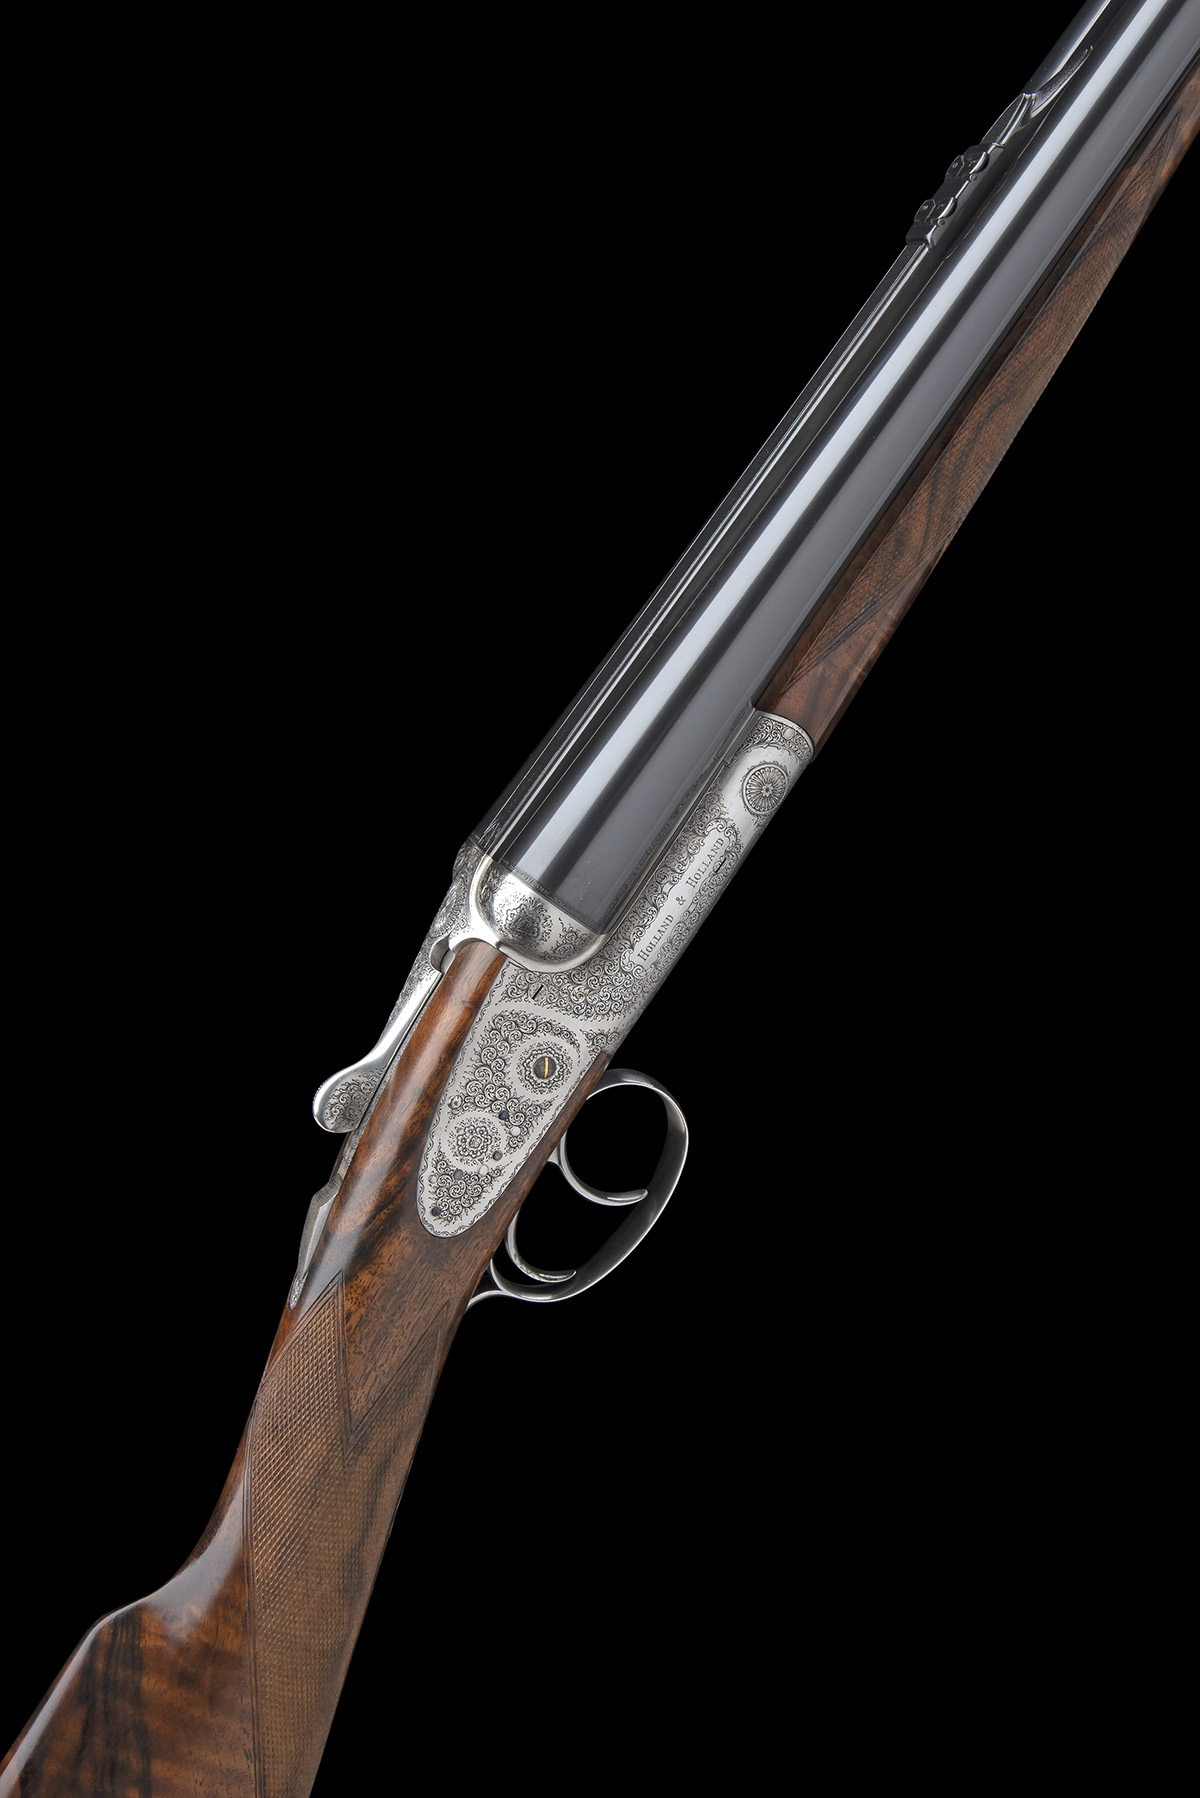 HOLLAND & HOLLAND A LITTLE USED 12-BORE 'THE PARADOX' ROUND-BODIED BACK-ACTION SIDELOCK EJECTOR SHOT